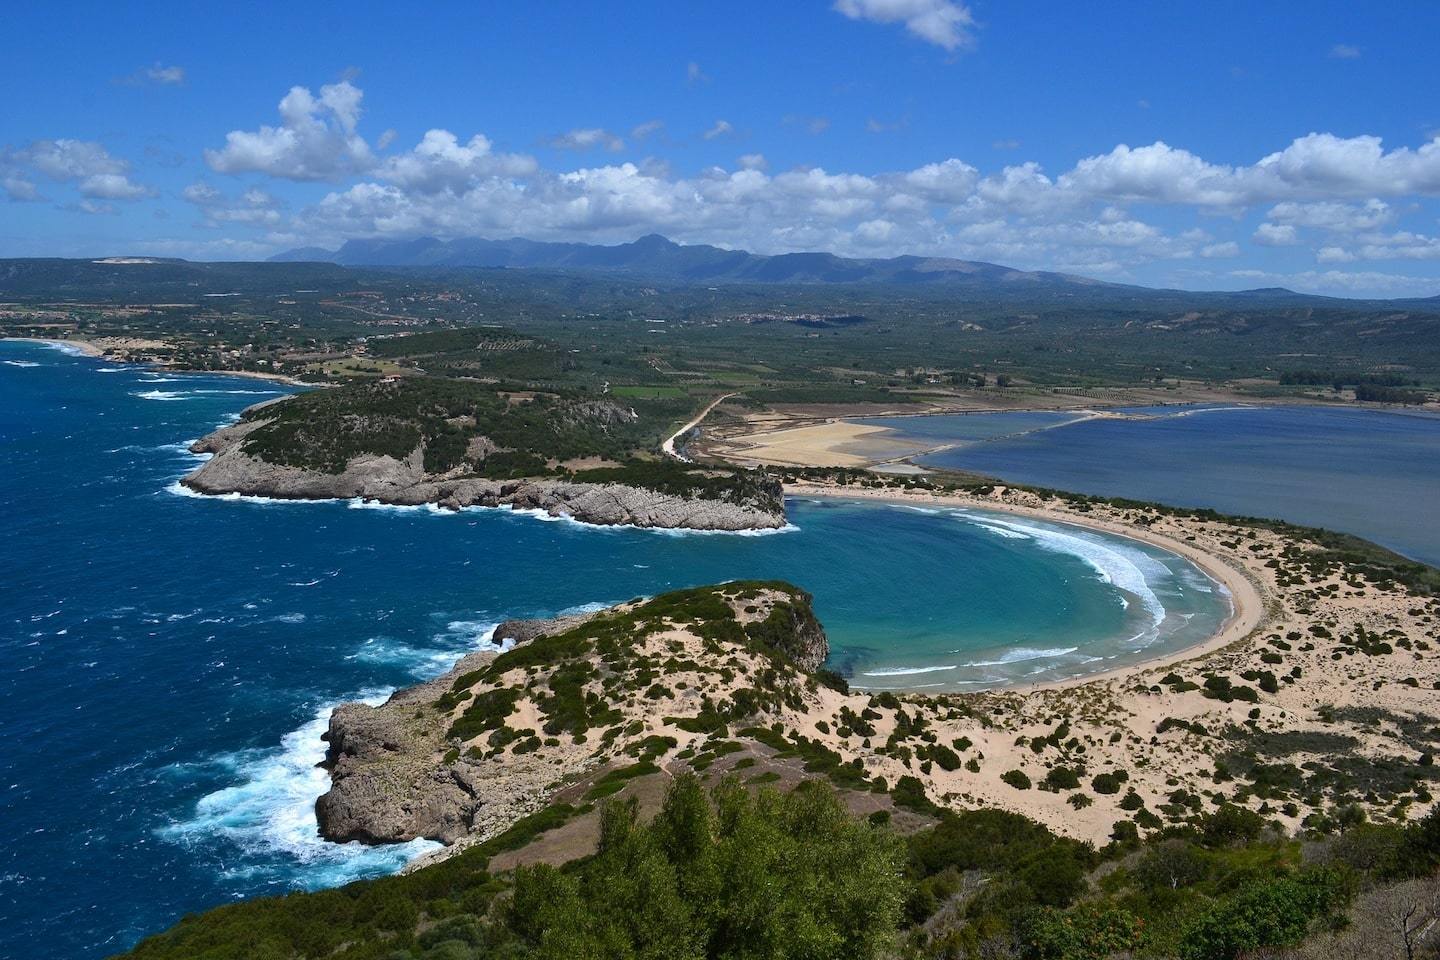 Aerial view of Voidokilia Beach in Greece with it's curved sand surrounded by mountains